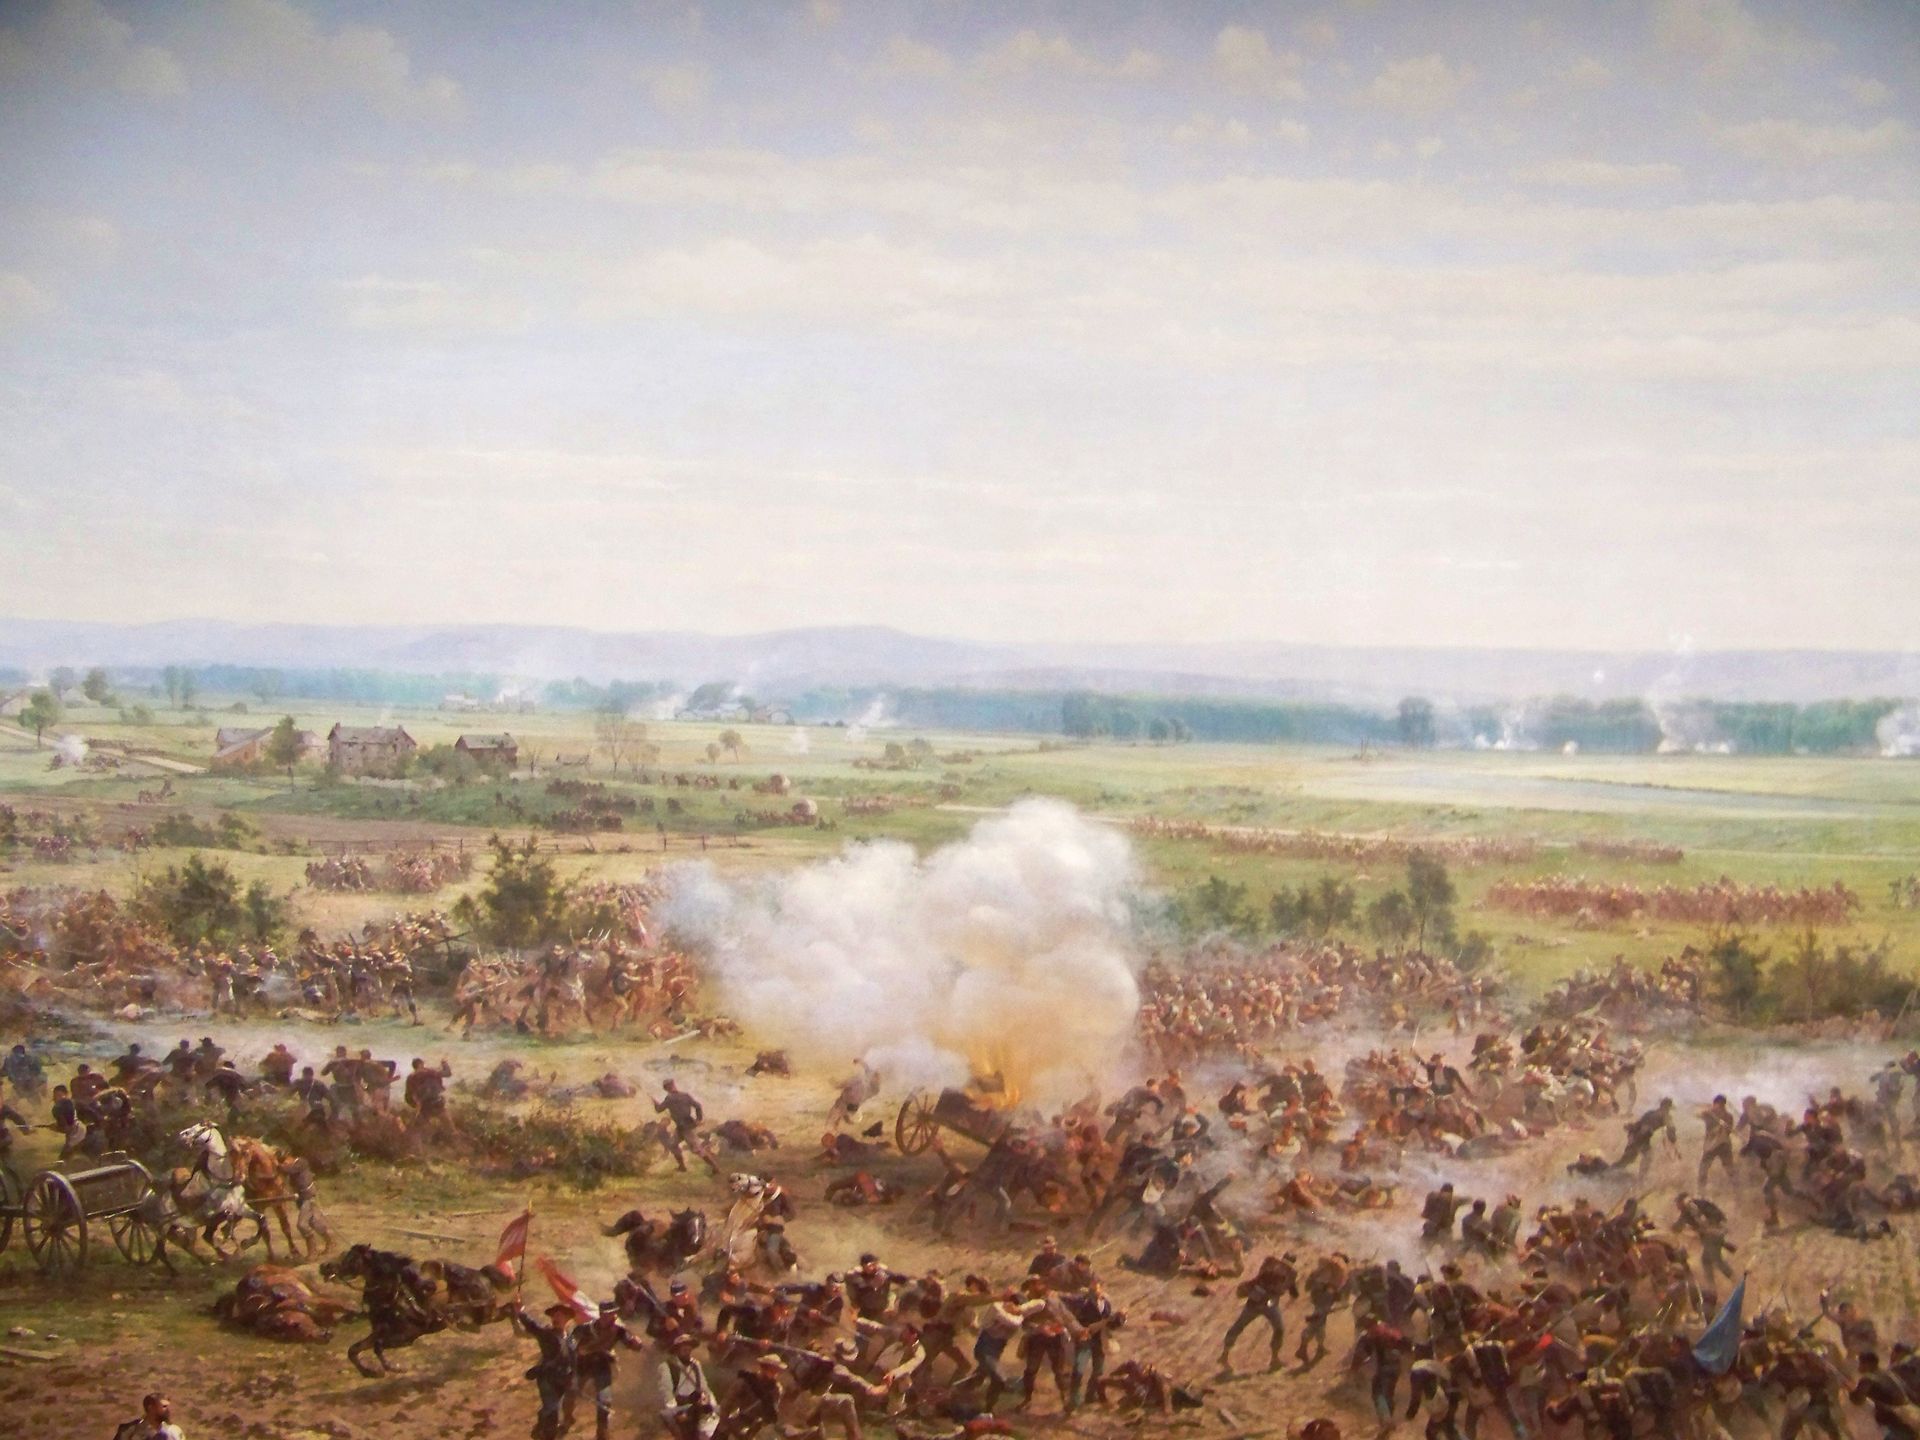 A scene from Pickett's Charge, the Gettysburg Cyclorama
